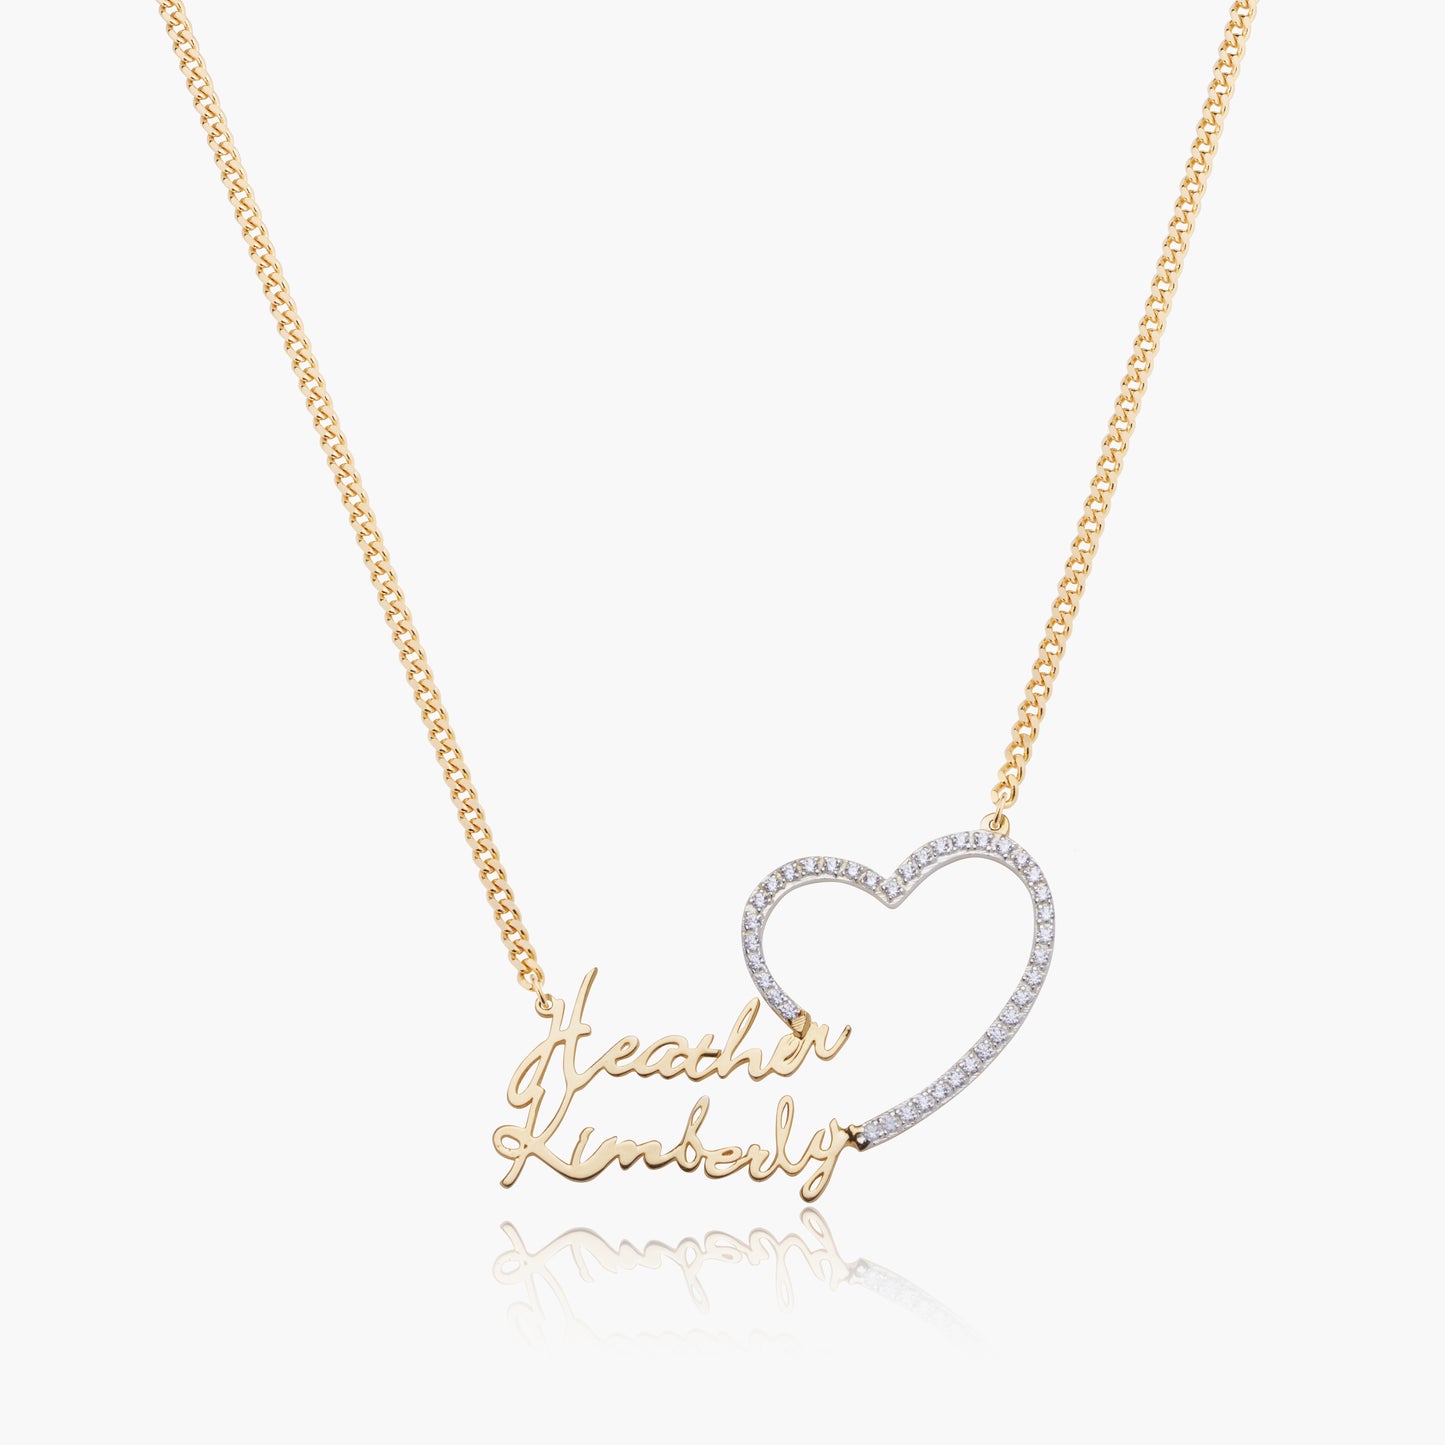 Couples Script Name Necklace w/ Iced Heart